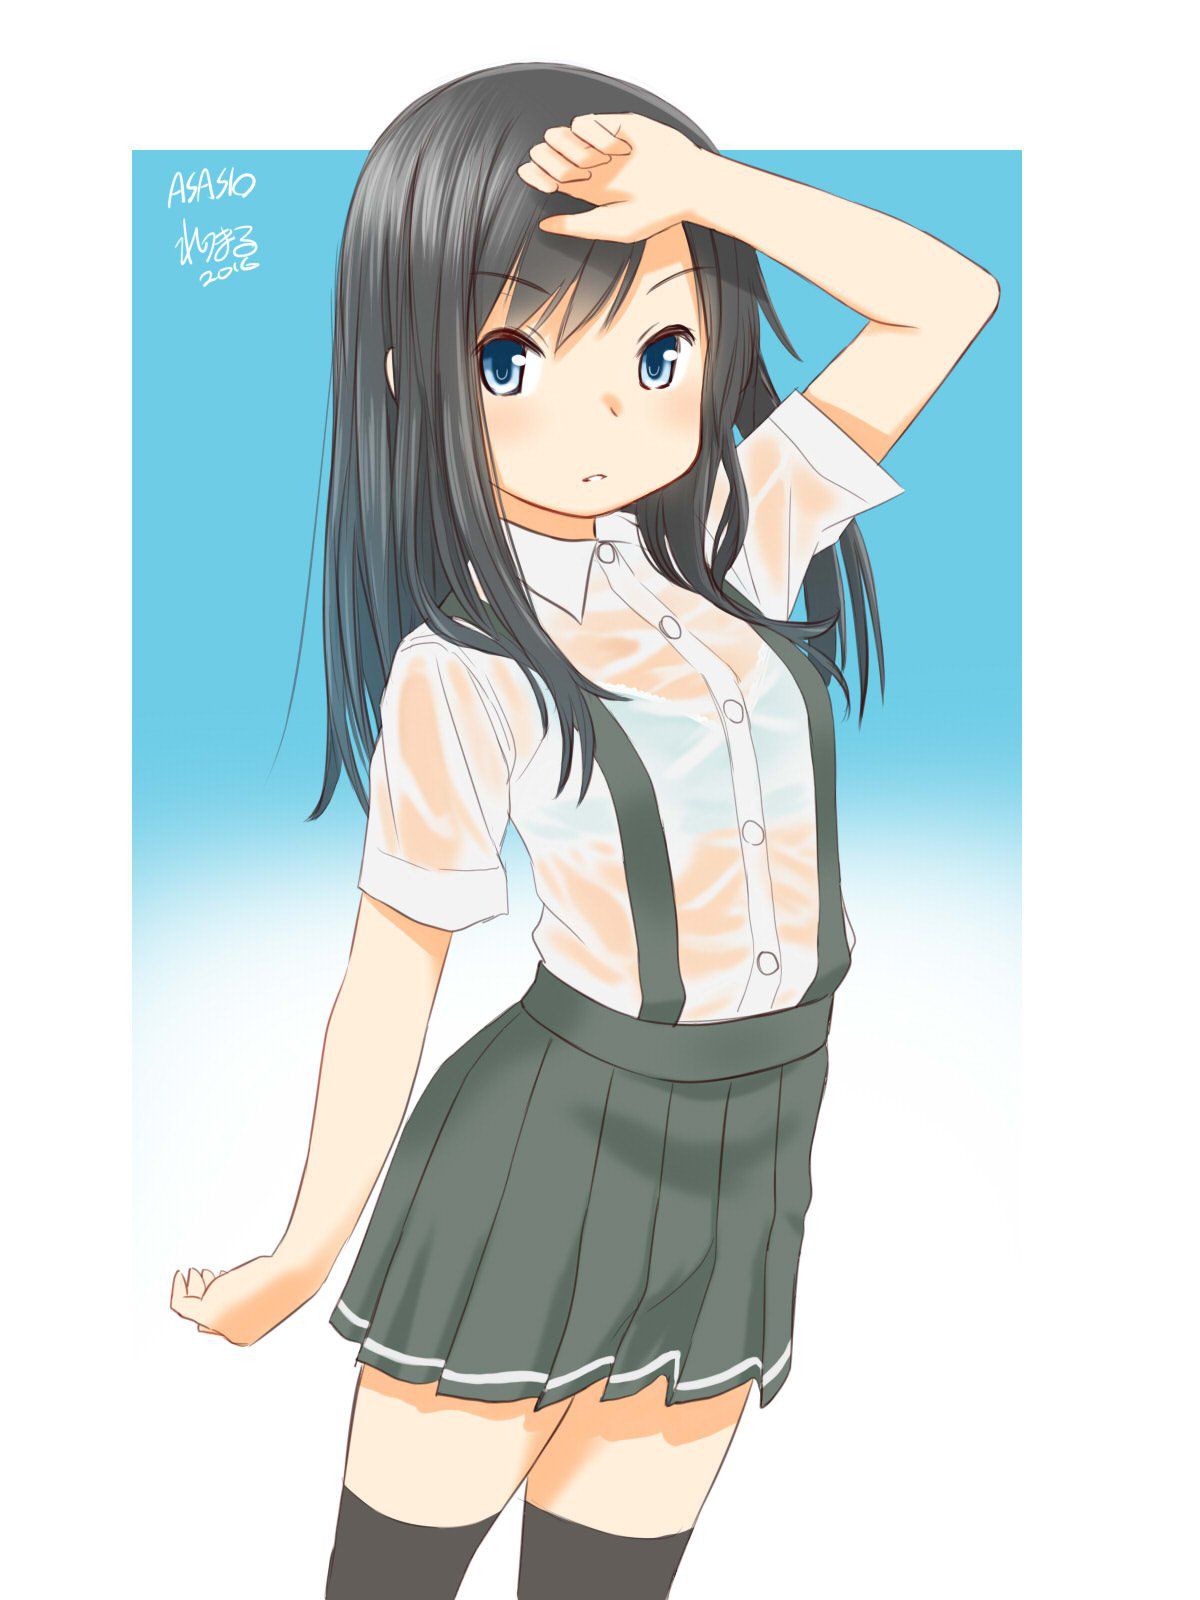 [Secondary, ZIP] pretty serious ship it together images of asashio 100 70